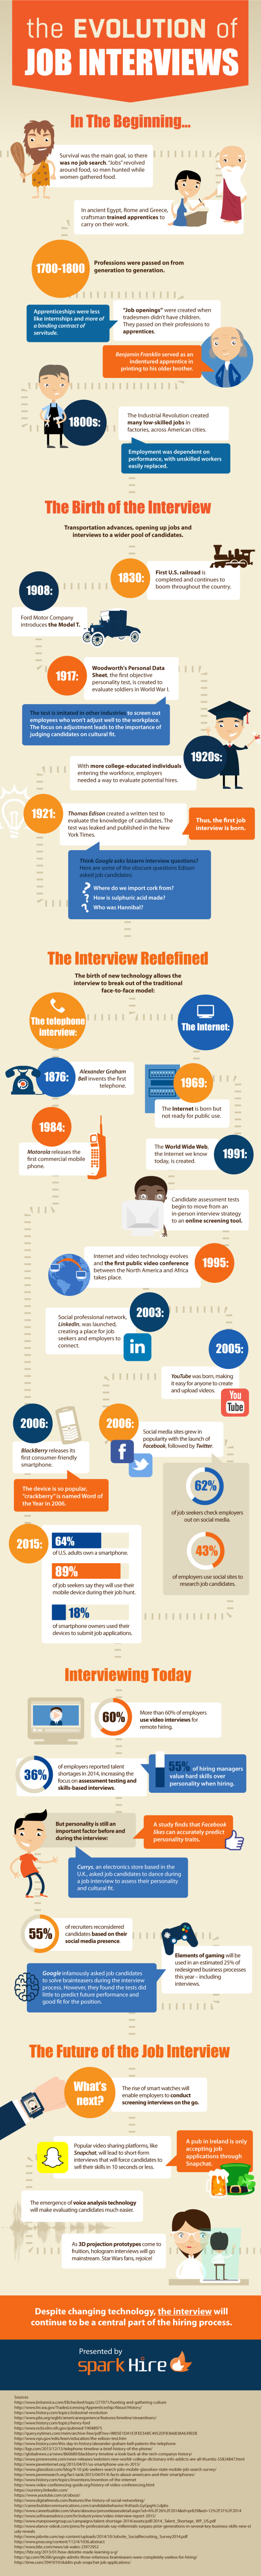 The evolution of job interviews (INFOGRAPHIC)